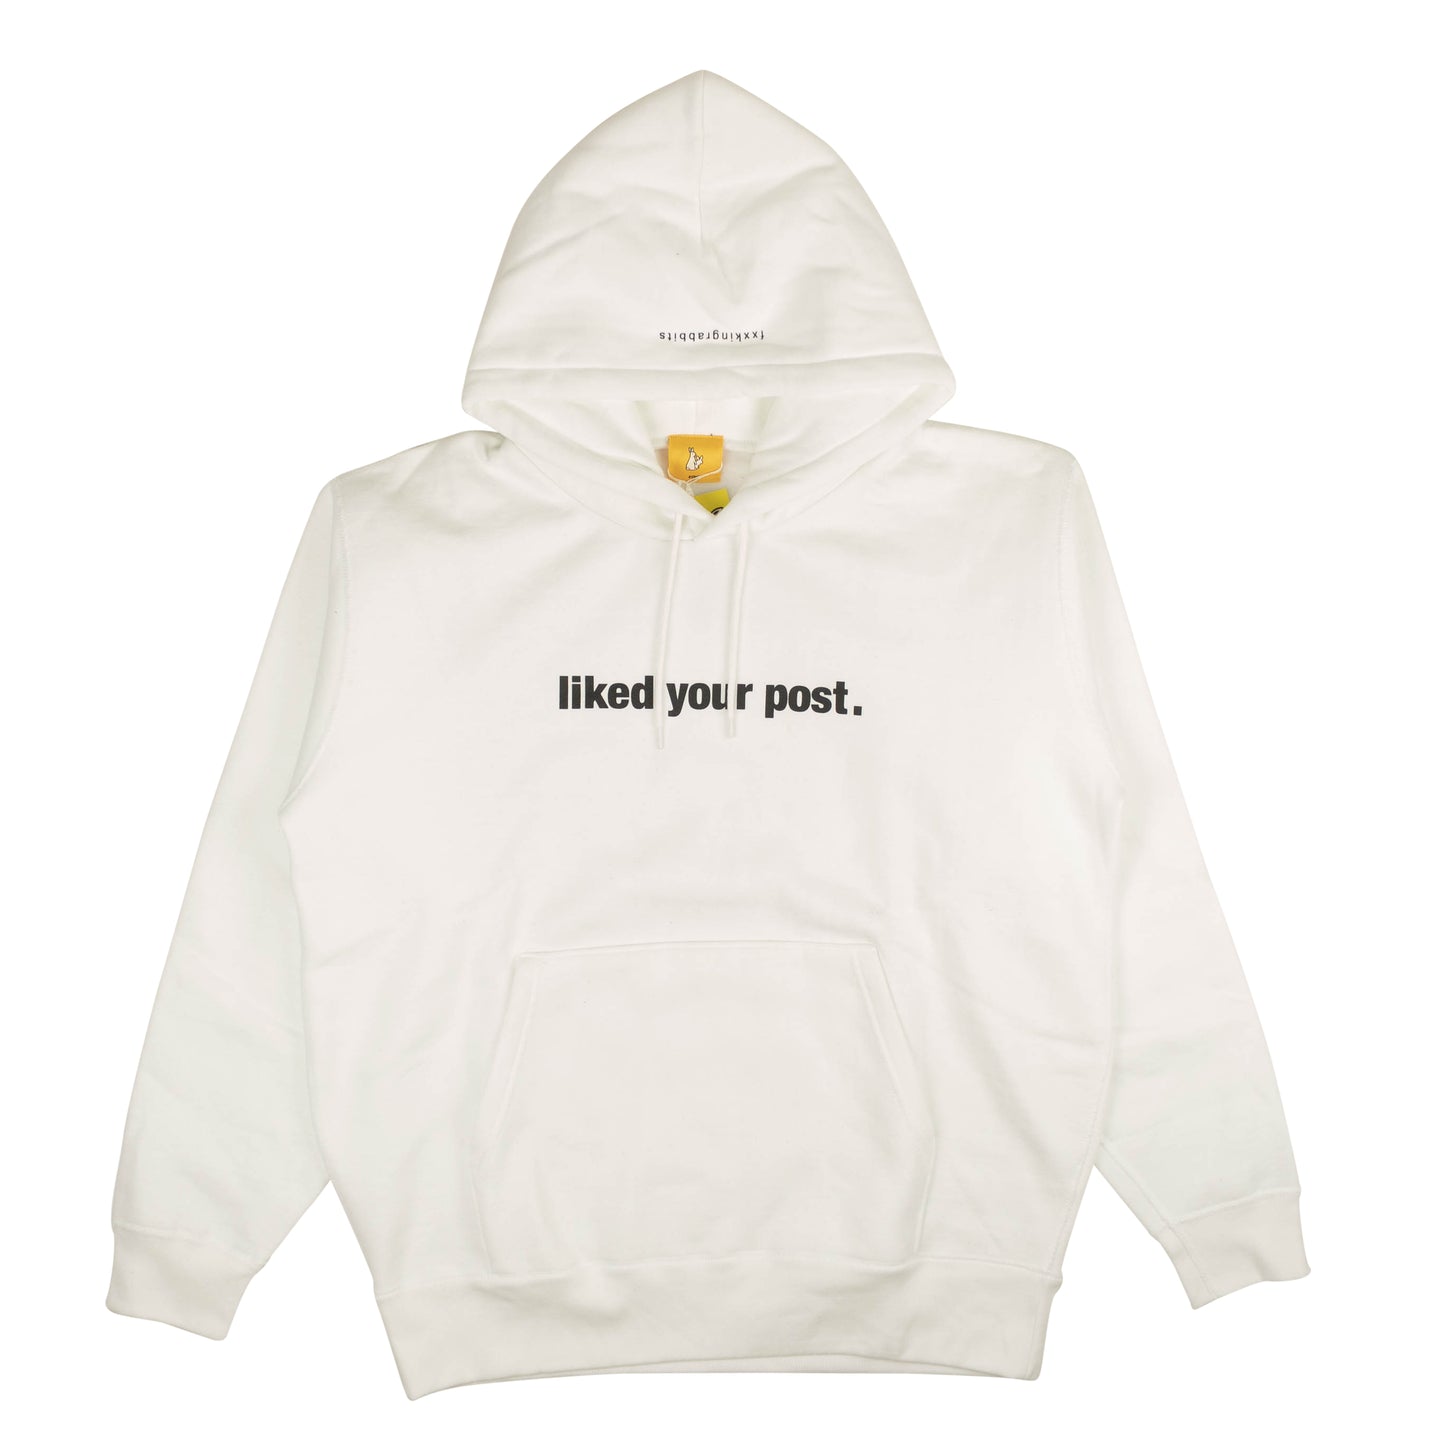 Fr2 Liked Your Post Hoodie - White